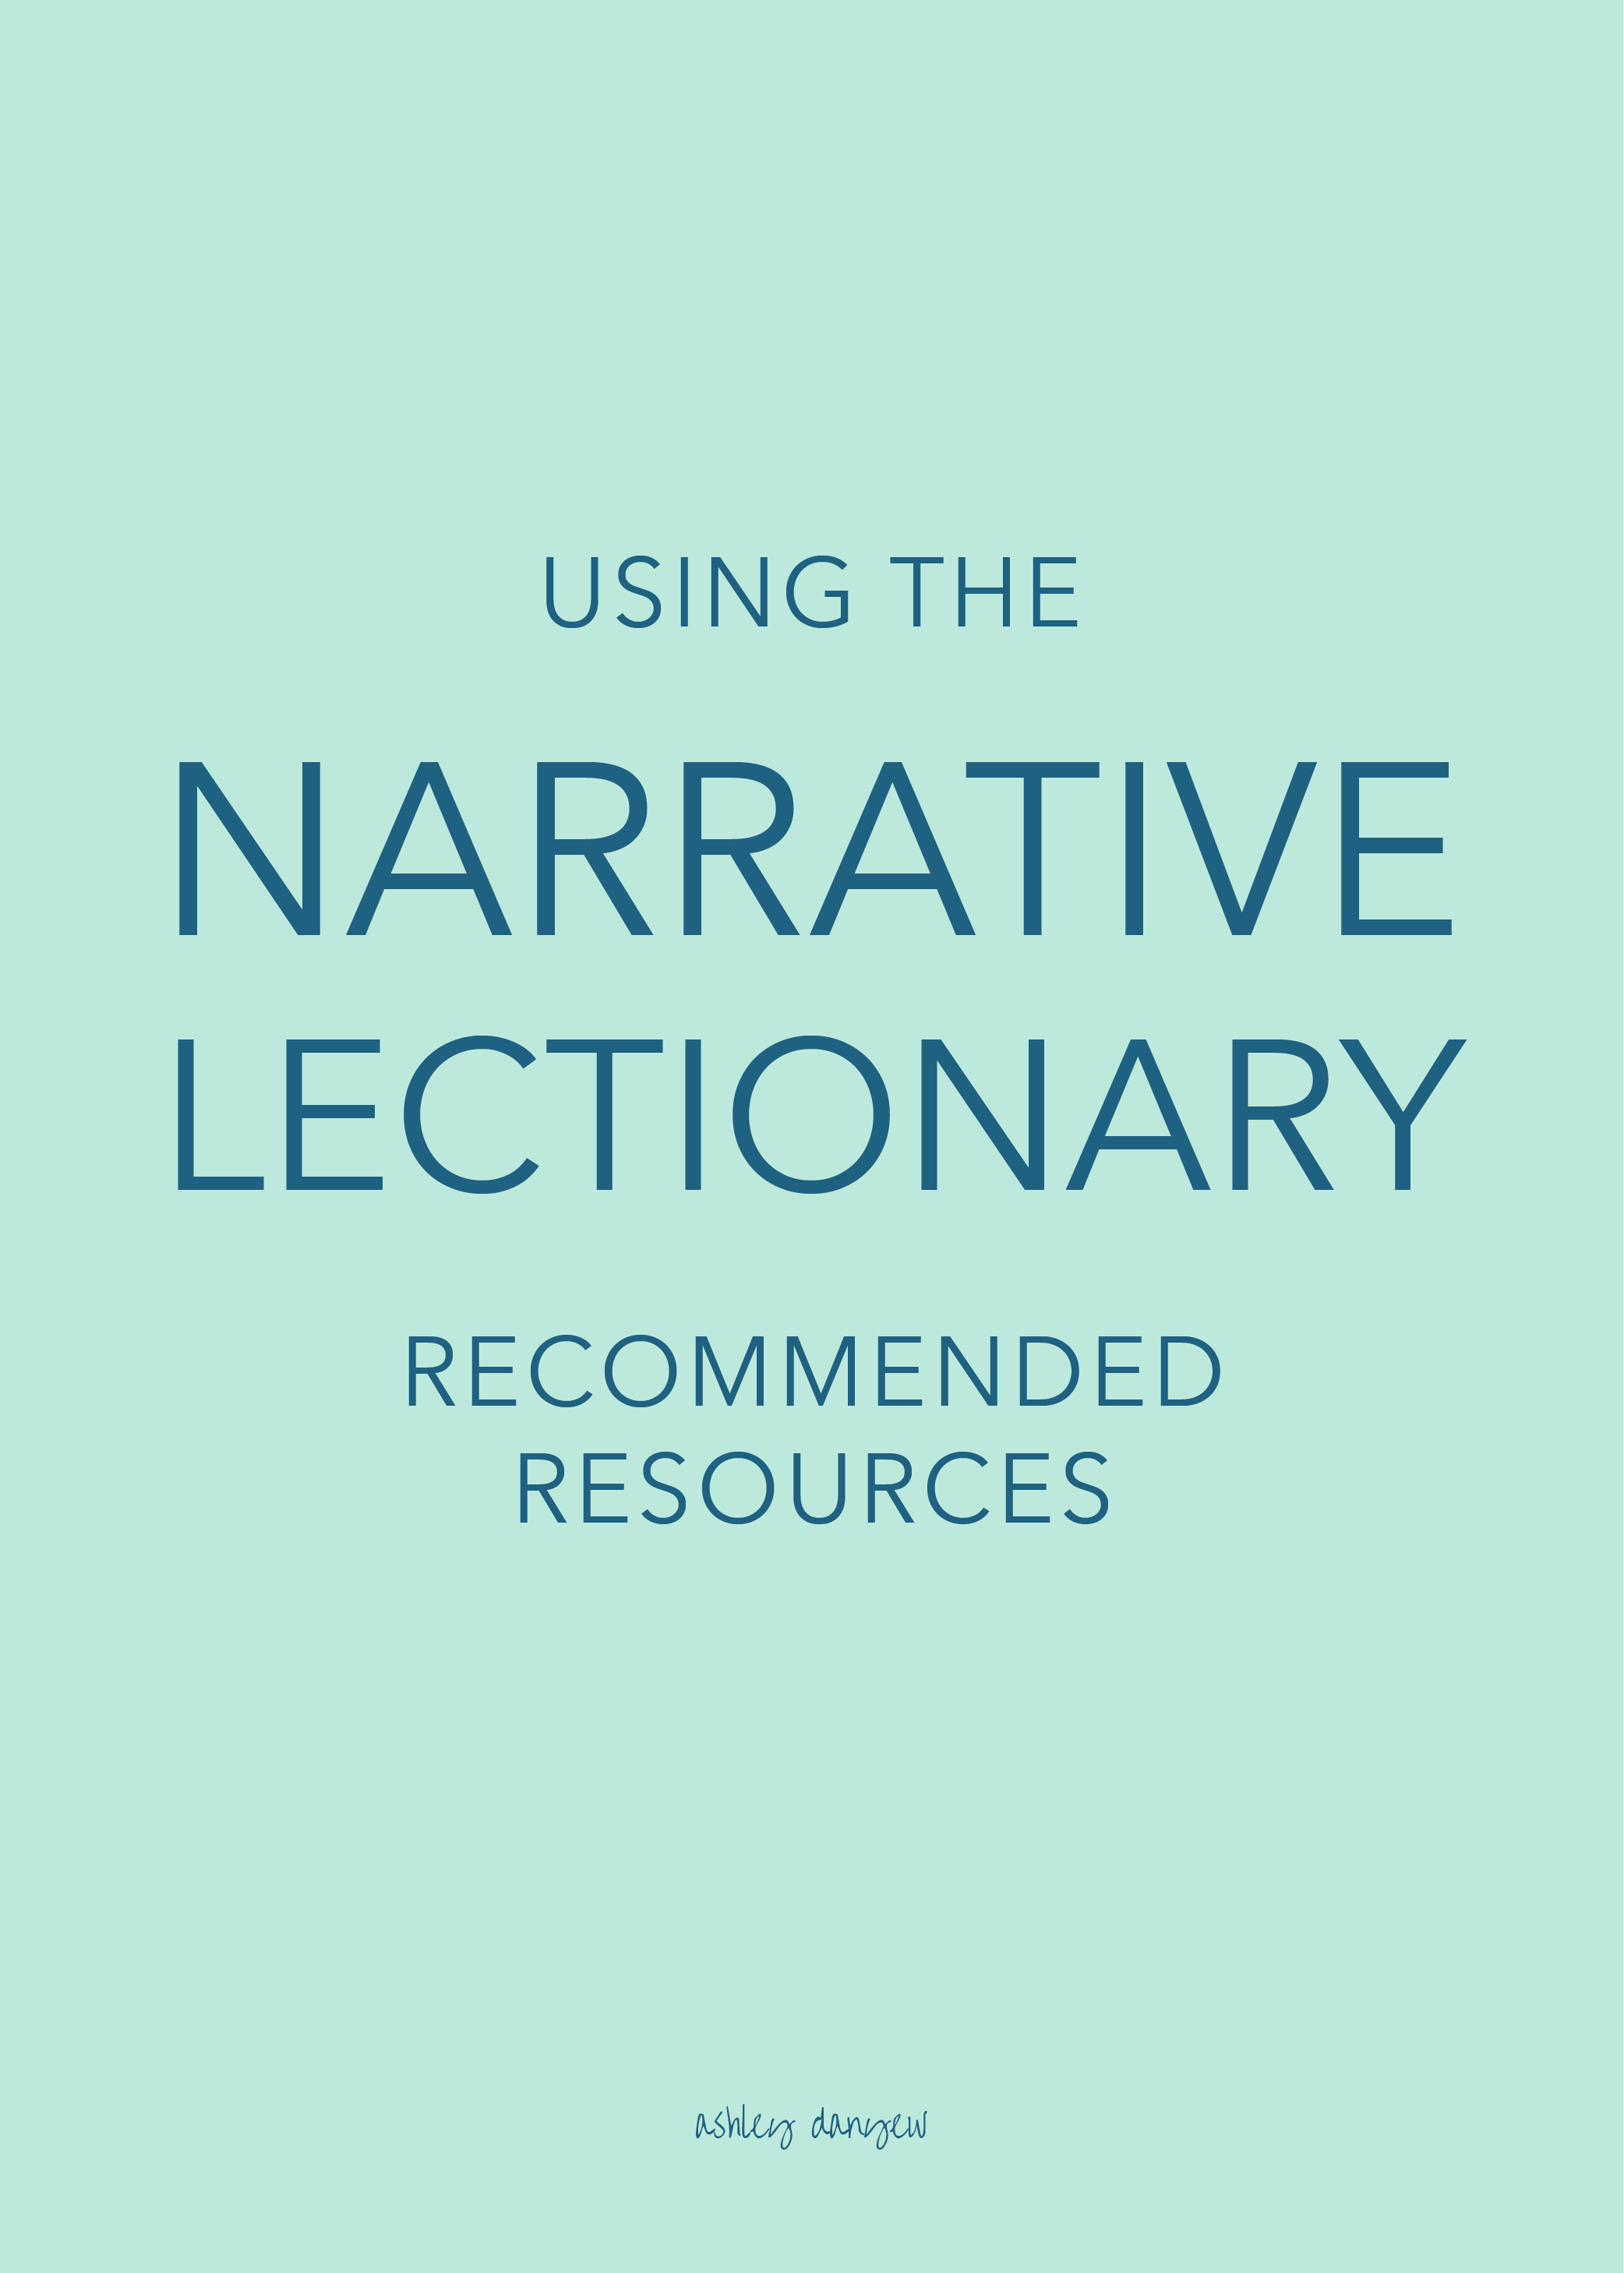 Copy of Using the Narrative Lectionary: Recommended Resources